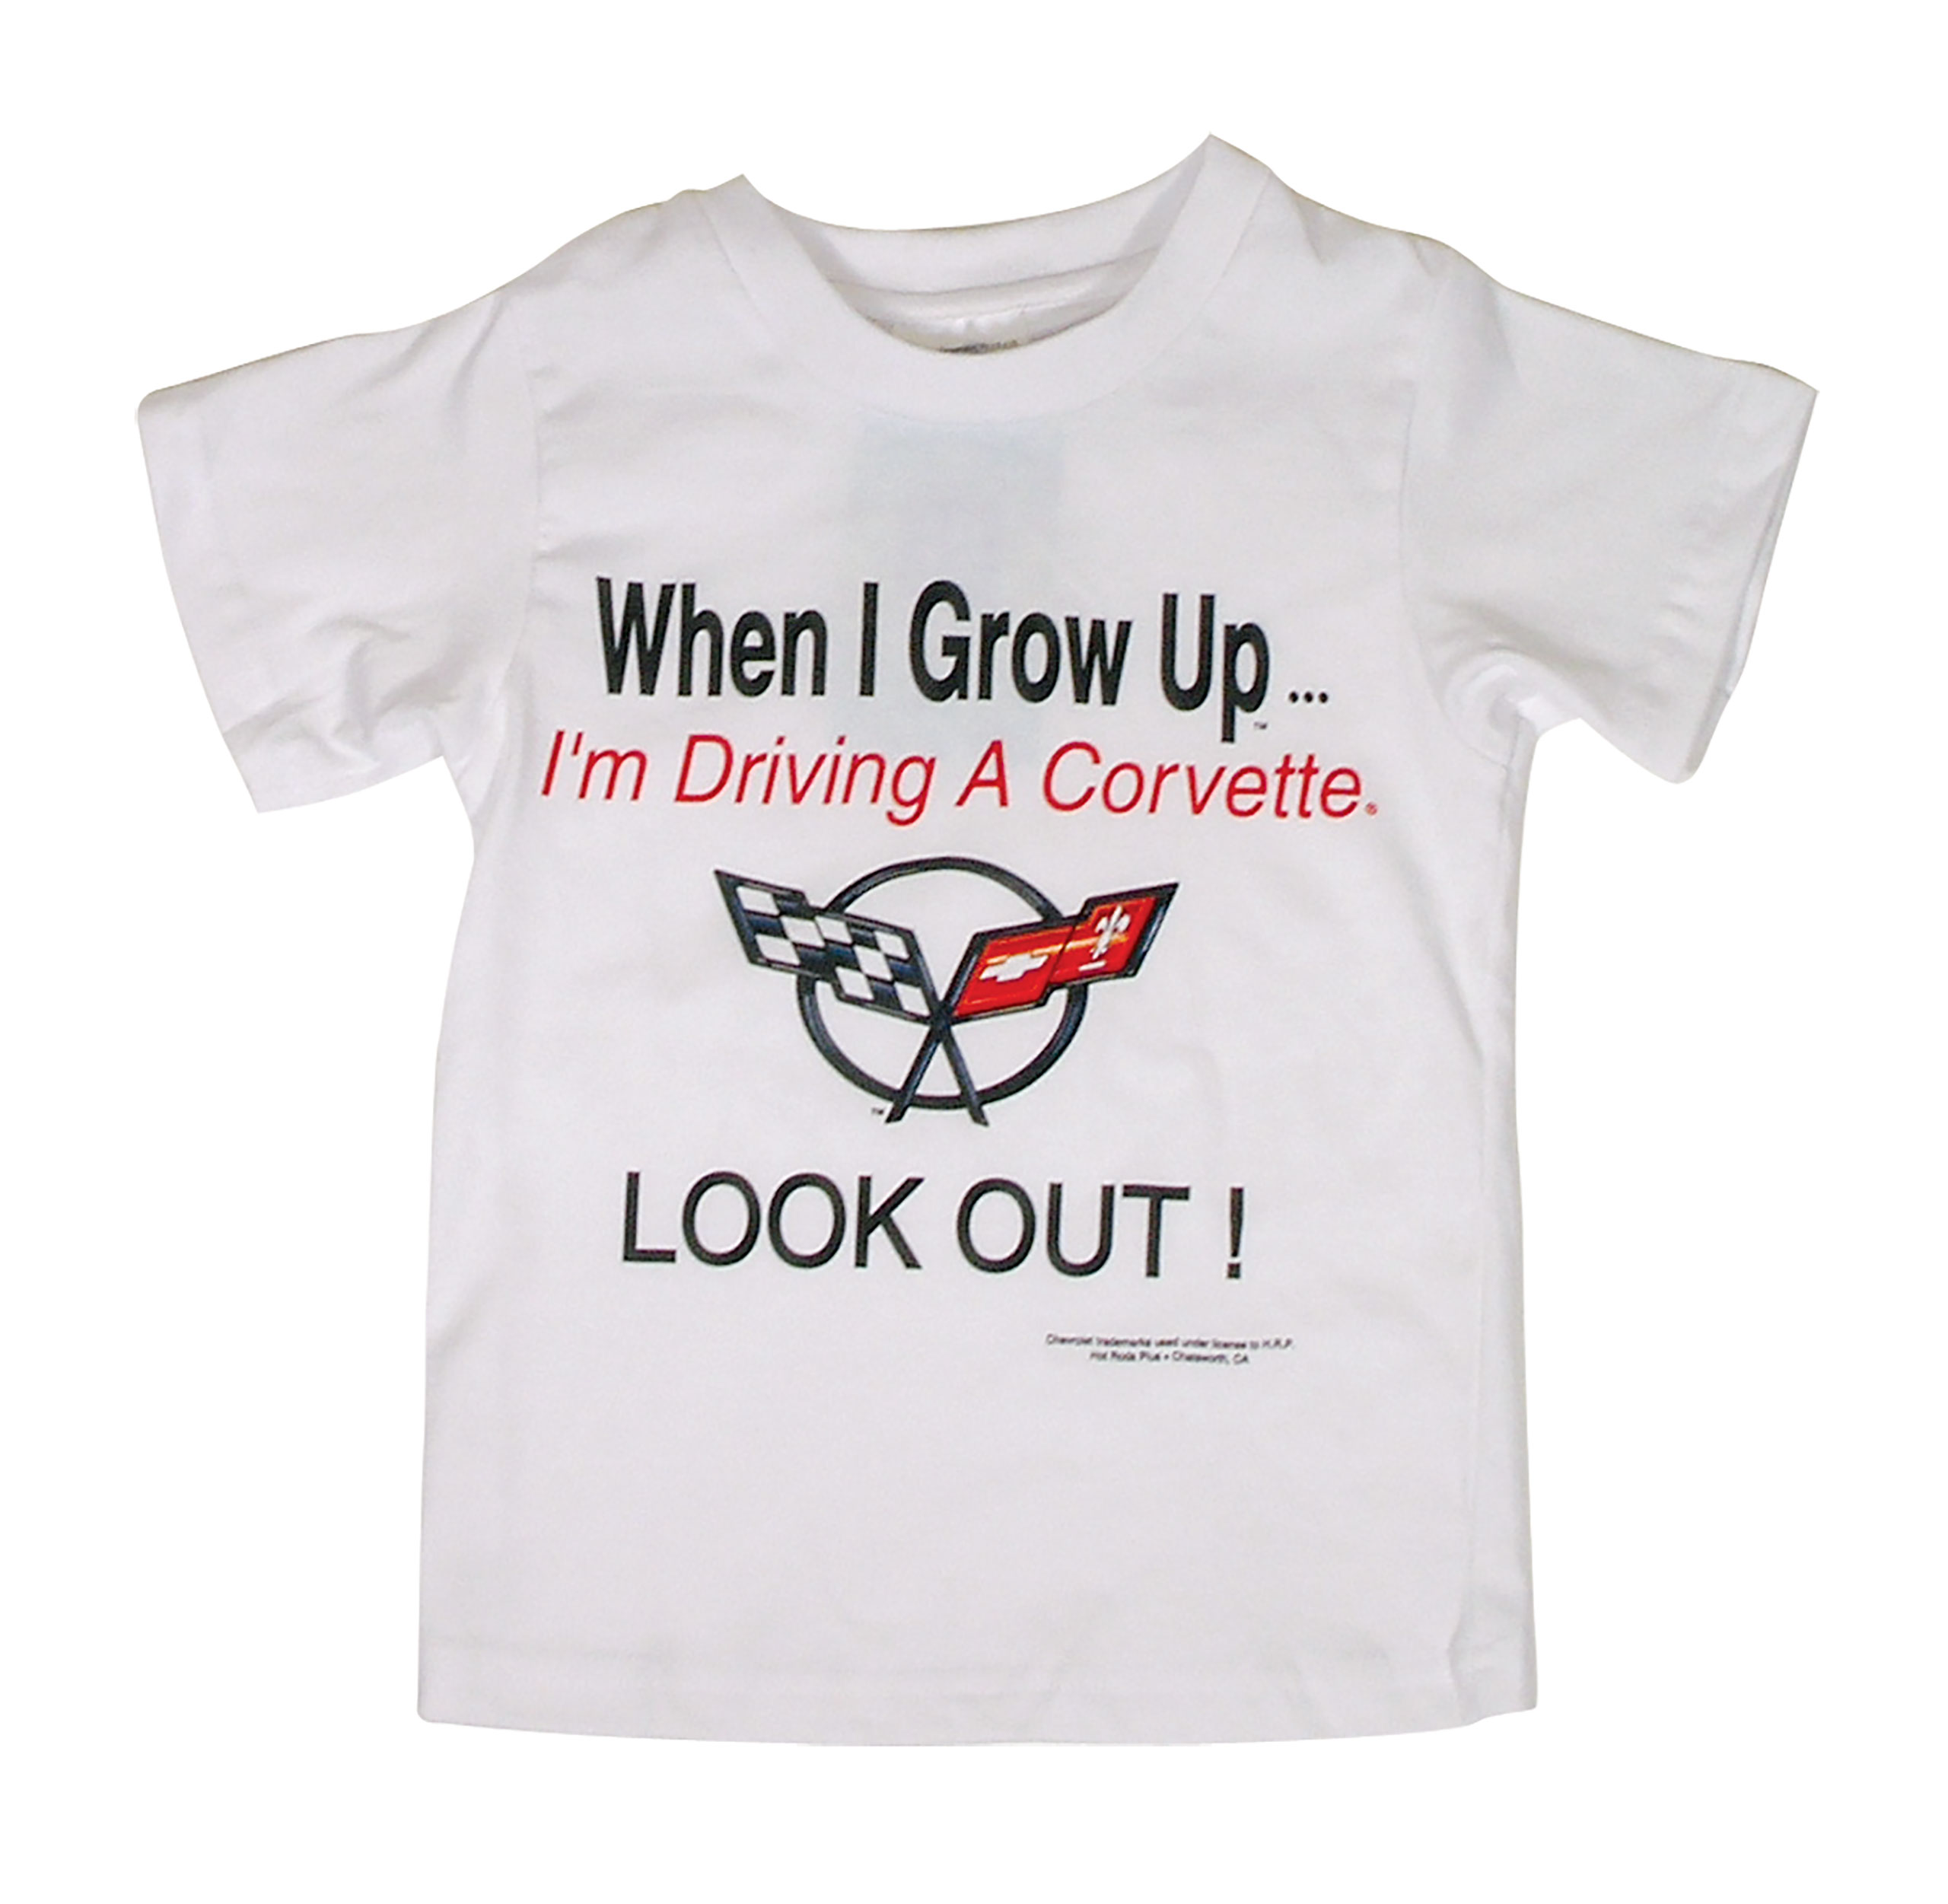 C5 1997-2004 Chevrolet Corvette T-Shirt. When I Grow Up W/Logo - 10-12 (MED) - Auto Accessories of America